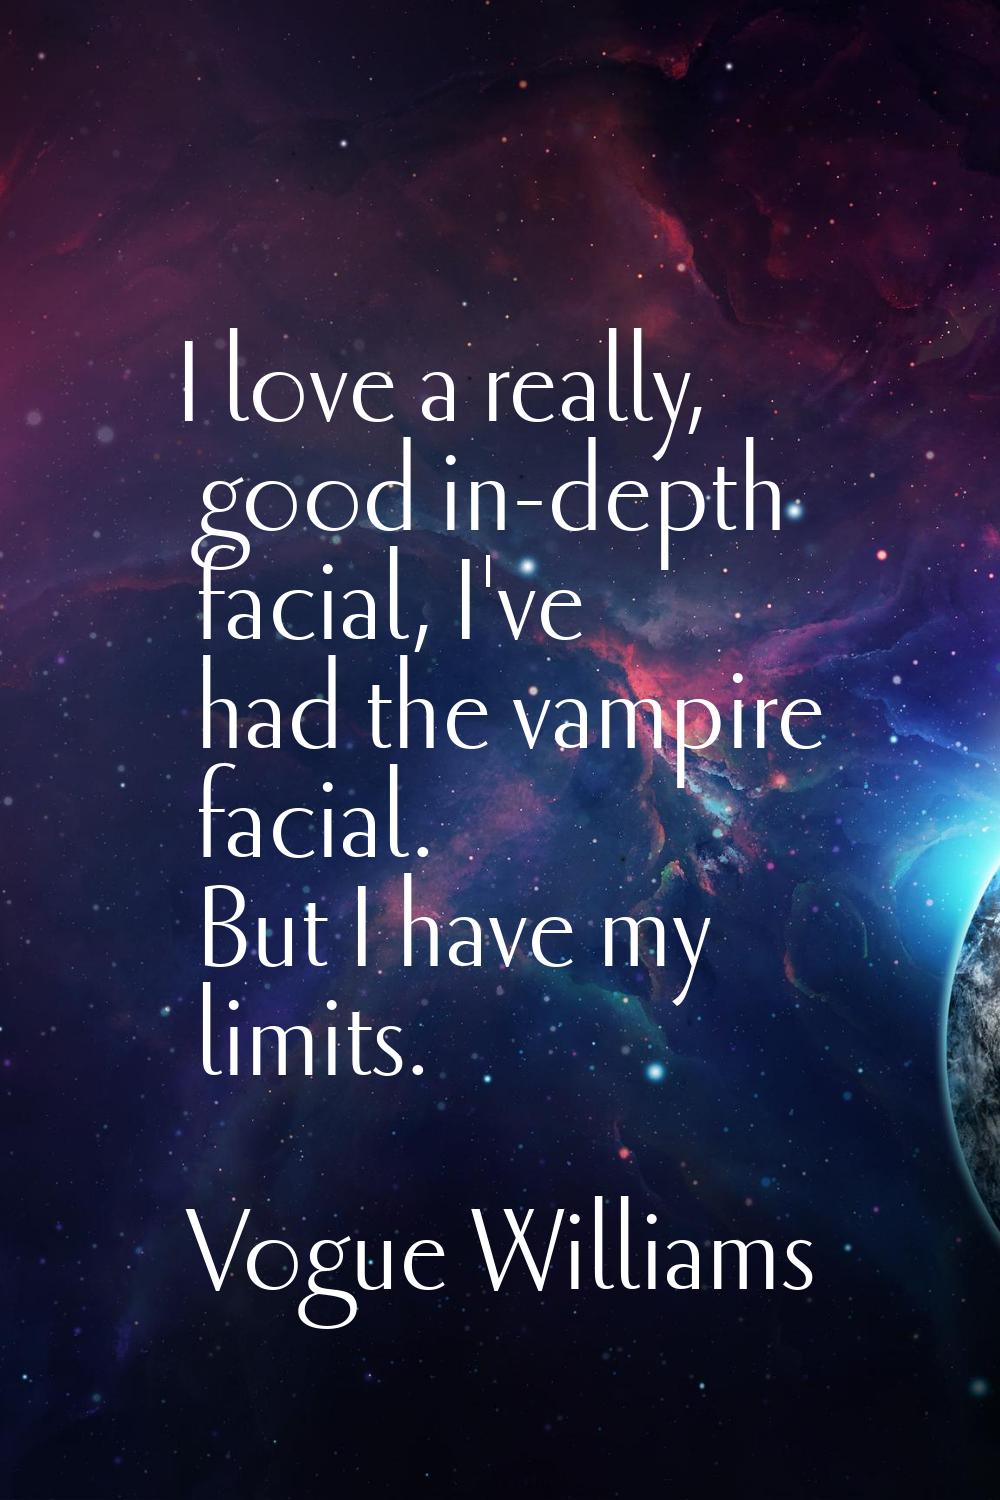 I love a really, good in-depth facial, I've had the vampire facial. But I have my limits.